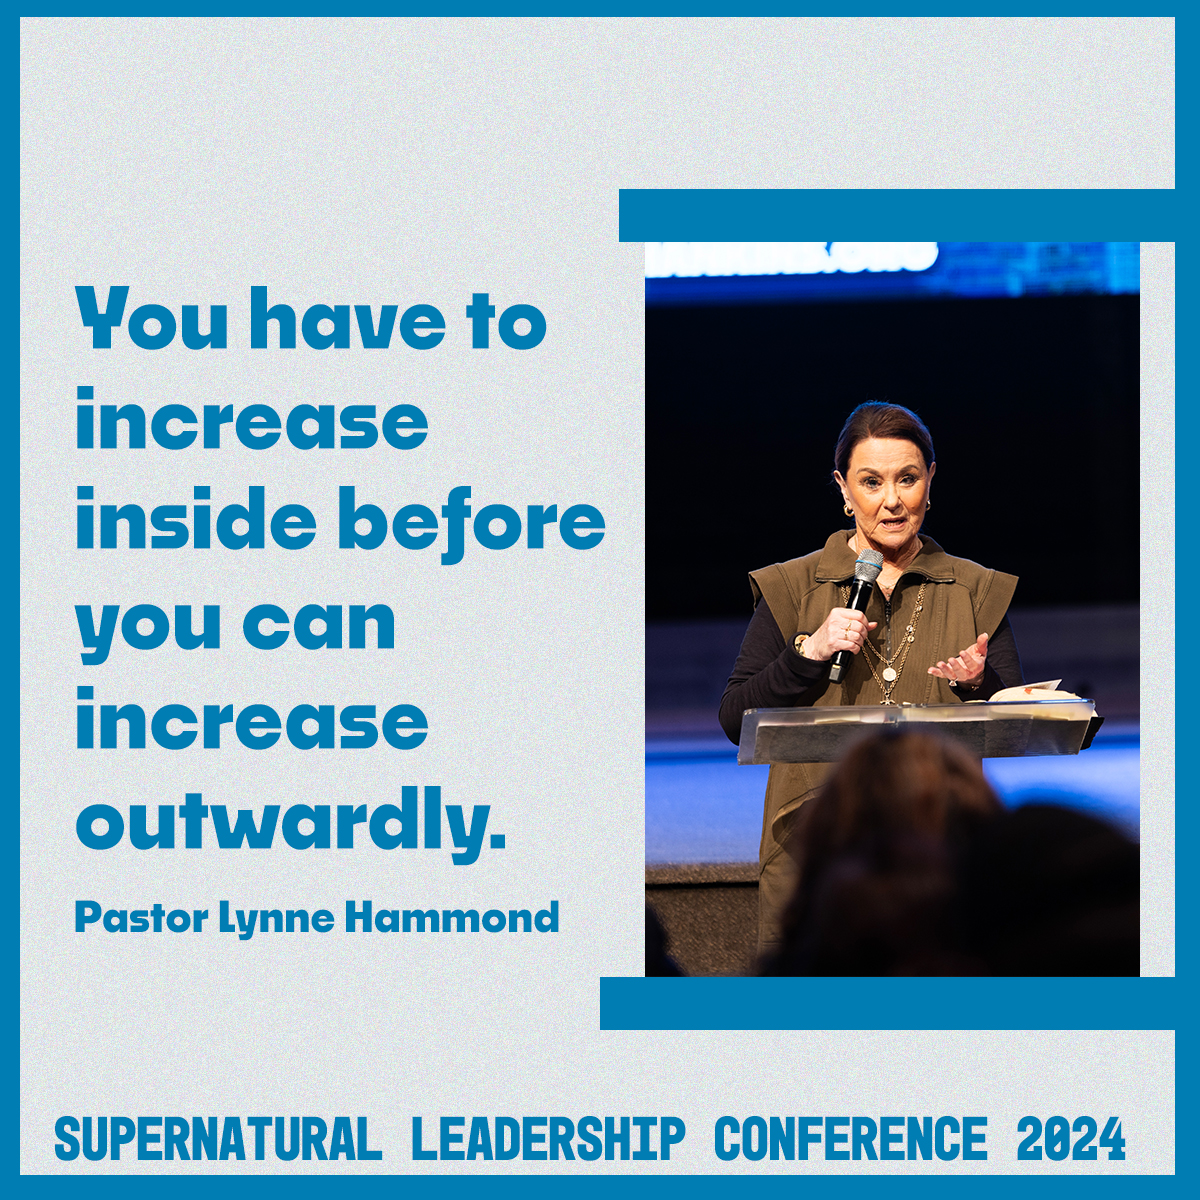 'You have to increase inside before you can increase outwardly.' Pastor Lynne Hammond #SLC24